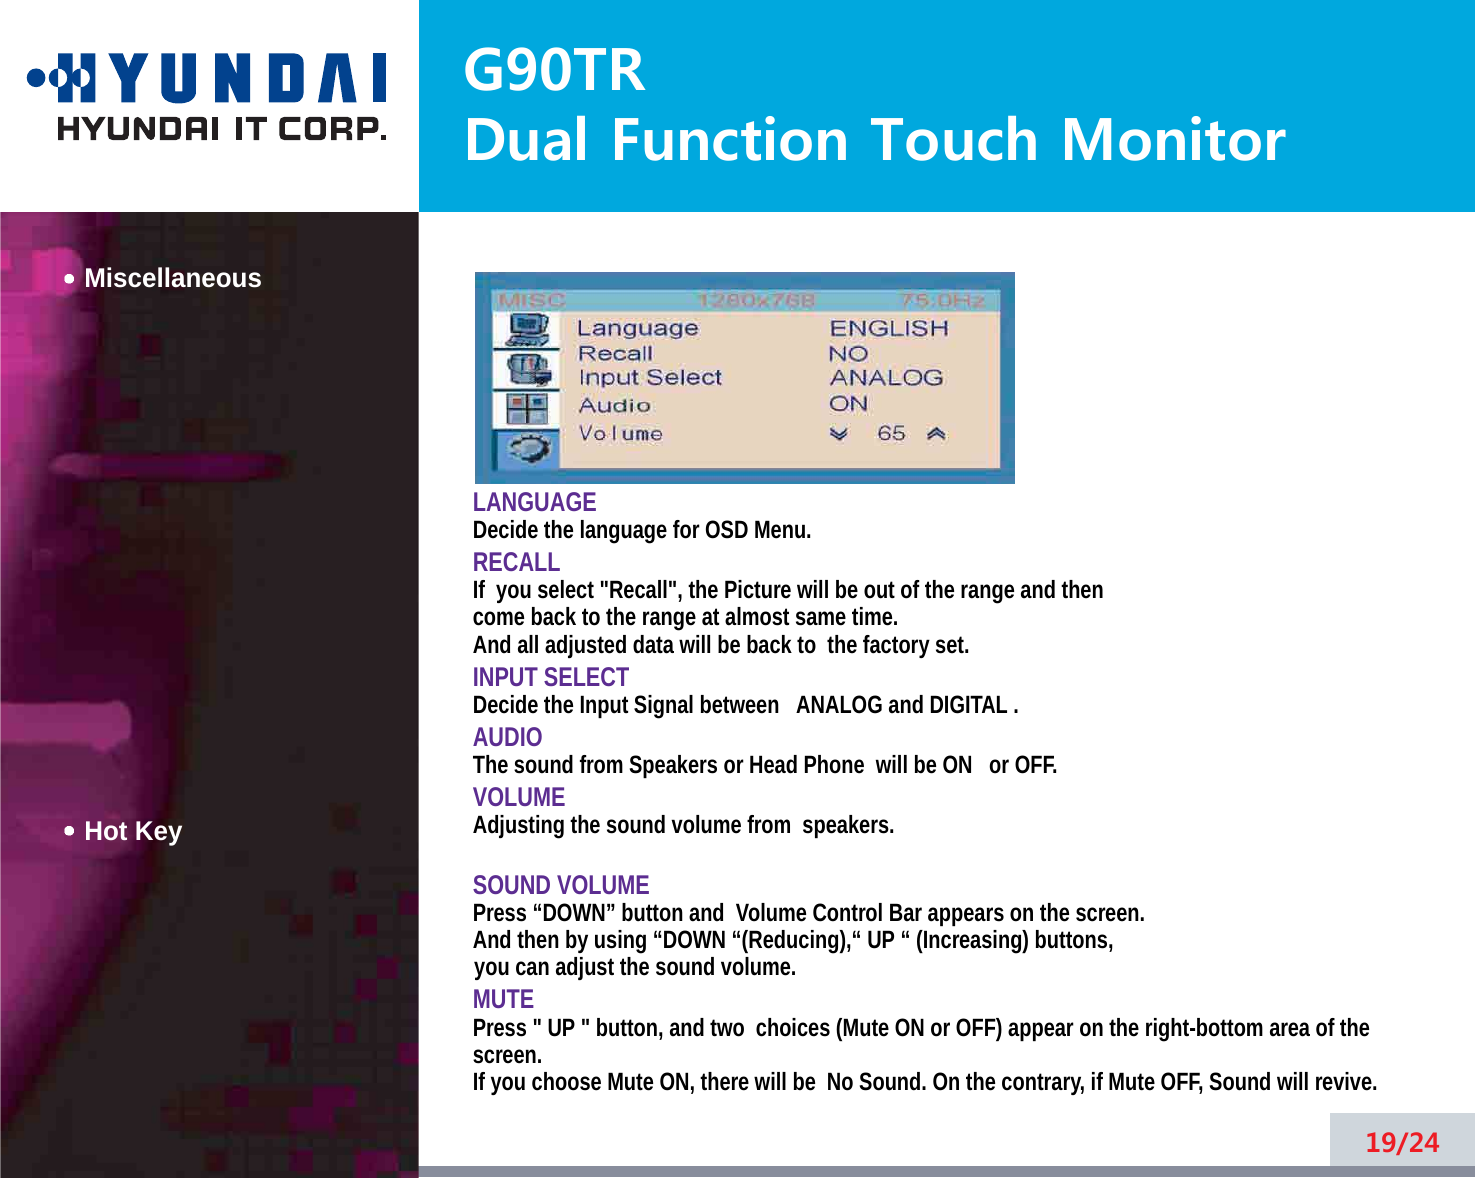 G90TRDual Function Touch MonitorMiscellaneousHot KeyLANGUAGEDecide the language for OSD Menu.RECALLIf  you select &quot;Recall&quot;, the Picture will be out of the range and thencome back to the range at almost same time.And all adjusted data will be back to  the factory set.INPUT SELECTDecide the Input Signal between ANALOG and DIGITAL .AUDIOThe sound from Speakers or Head Phone  will be ON or OFF.VOLUMEAdjusting the sound volume from  speakers.SOUND VOLUMEPress “DOWN” button and  Volume Control Bar appears on the screen. And then by using “DOWN “(Reducing),“ UP “ (Increasing) buttons, you can adjust the sound volume.MUTEPress &quot; UP &quot; button, and two  choices (Mute ON or OFF) appear on the right-bottom area of thescreen.If you choose Mute ON, there will be  No Sound. On the contrary, if Mute OFF, Sound will revive.19/24